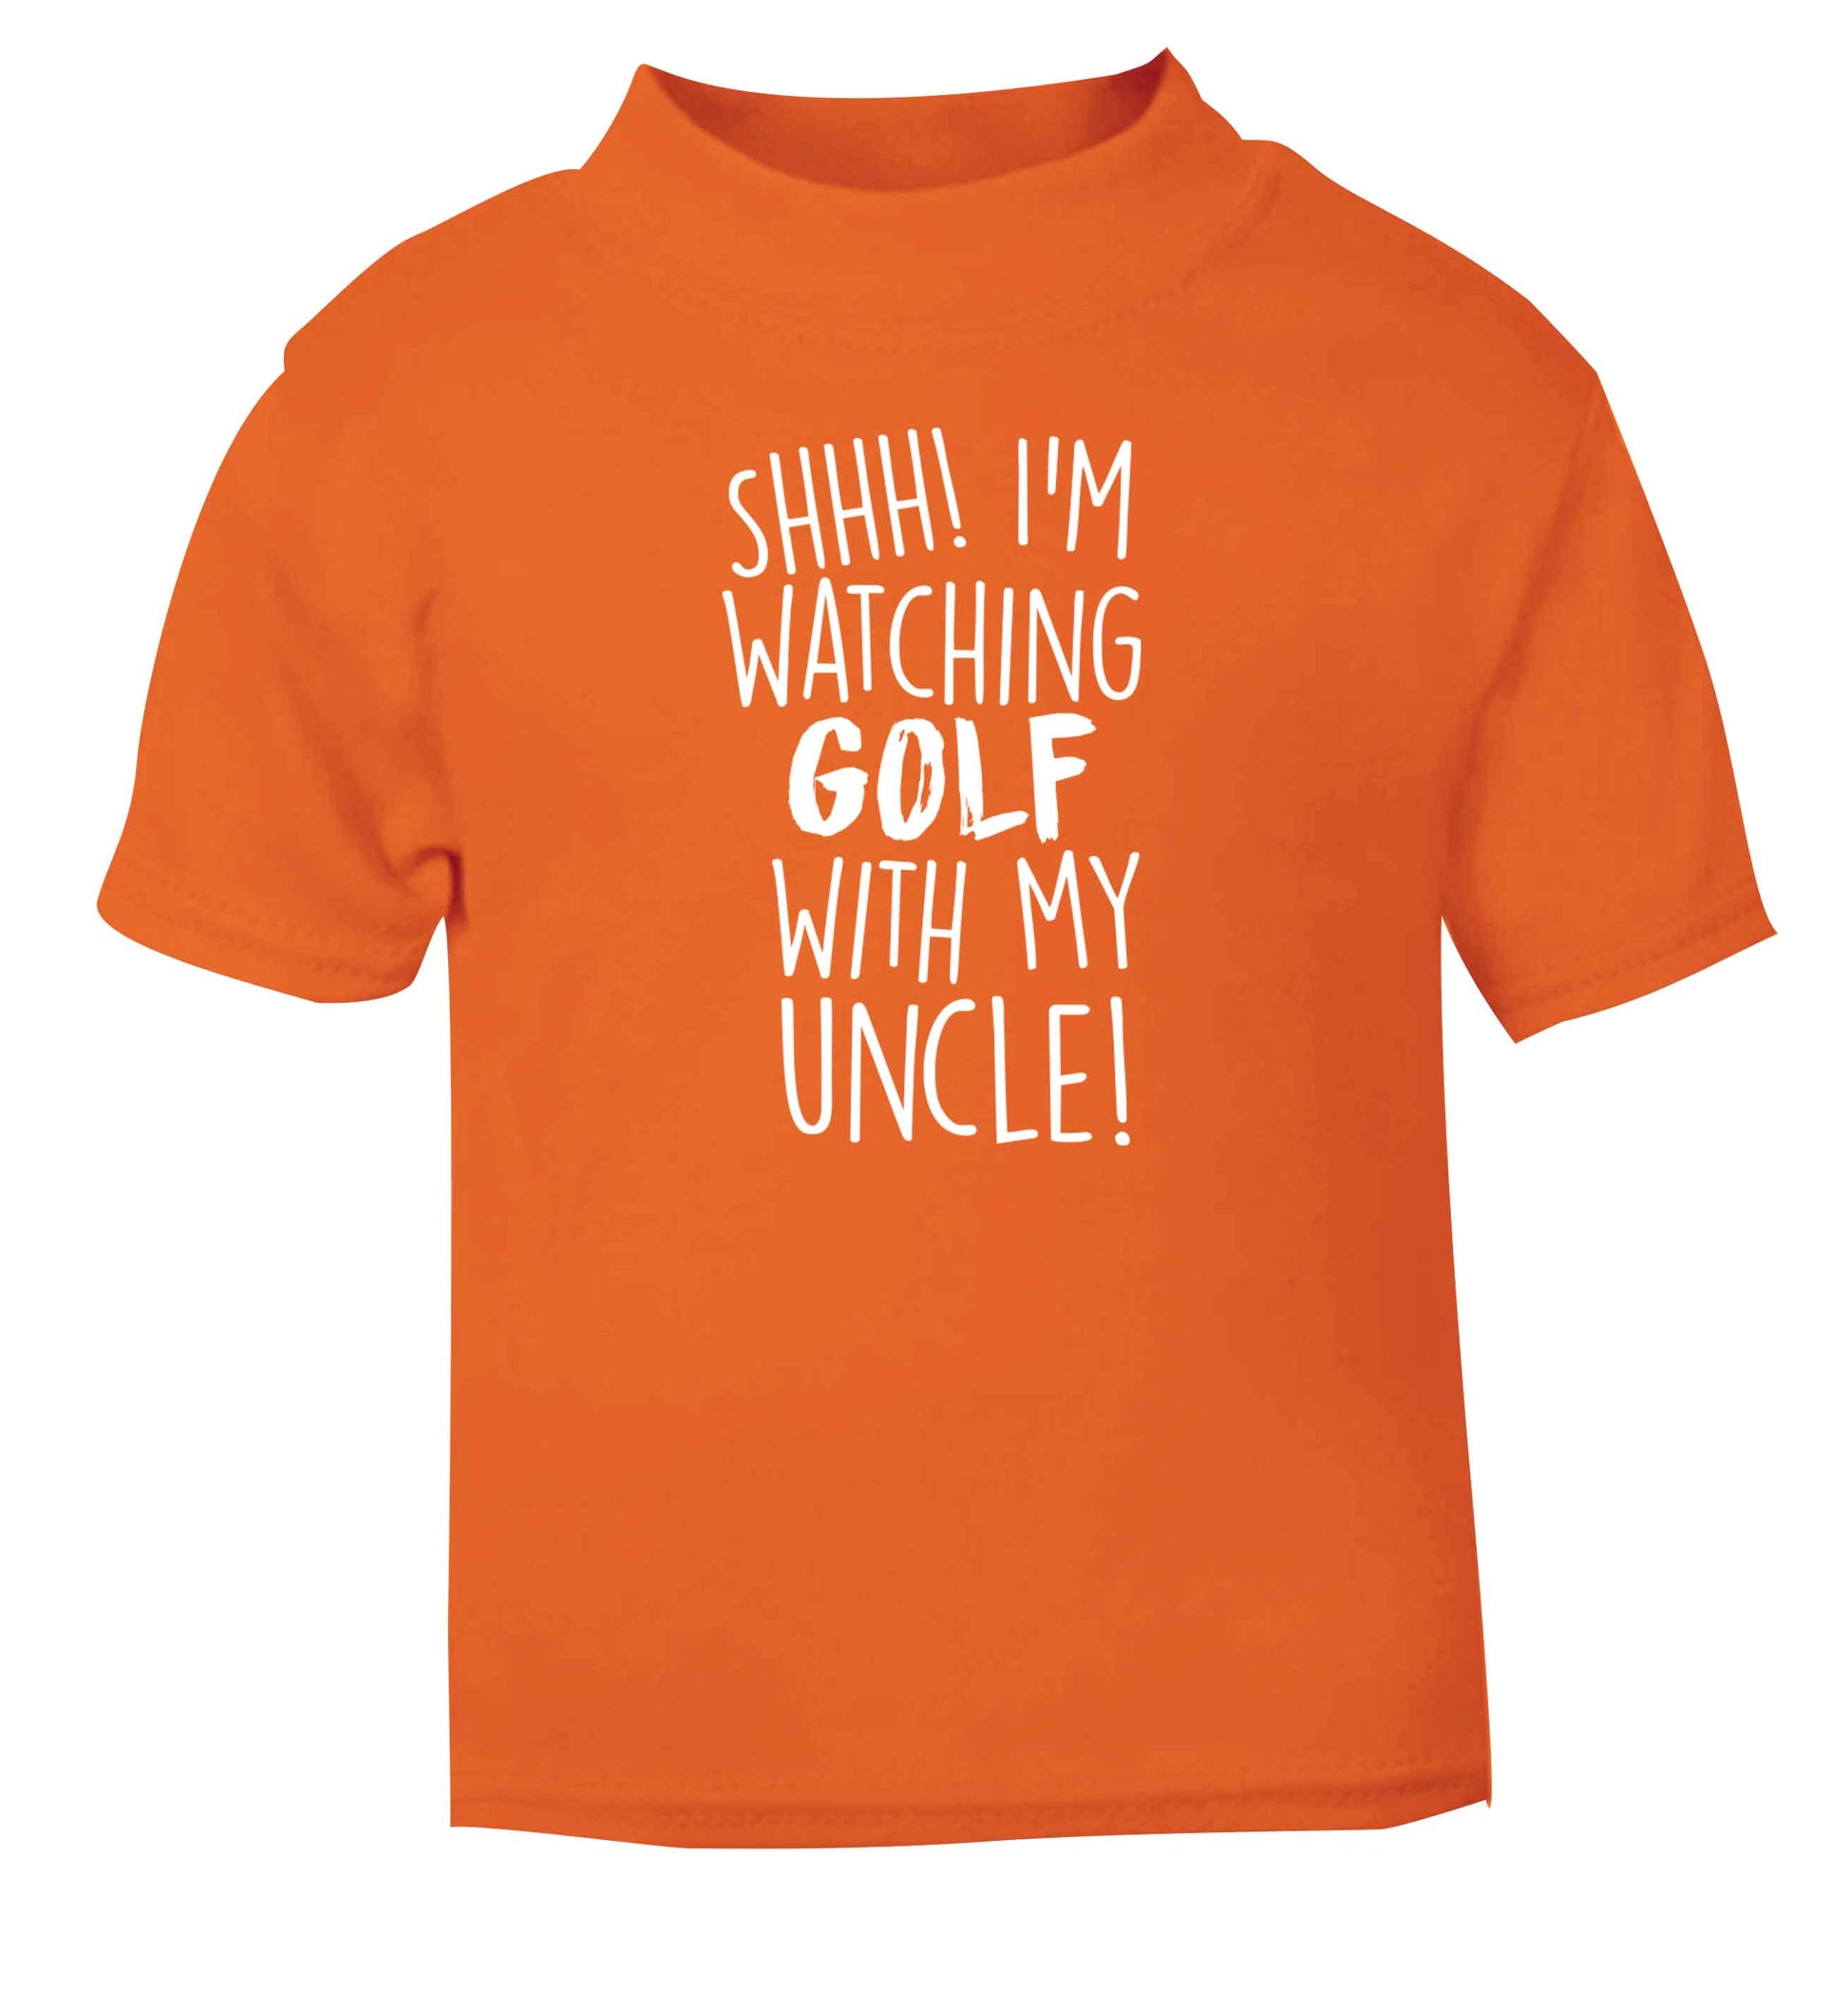 Shh I'm watching golf with my uncle orange Baby Toddler Tshirt 2 Years